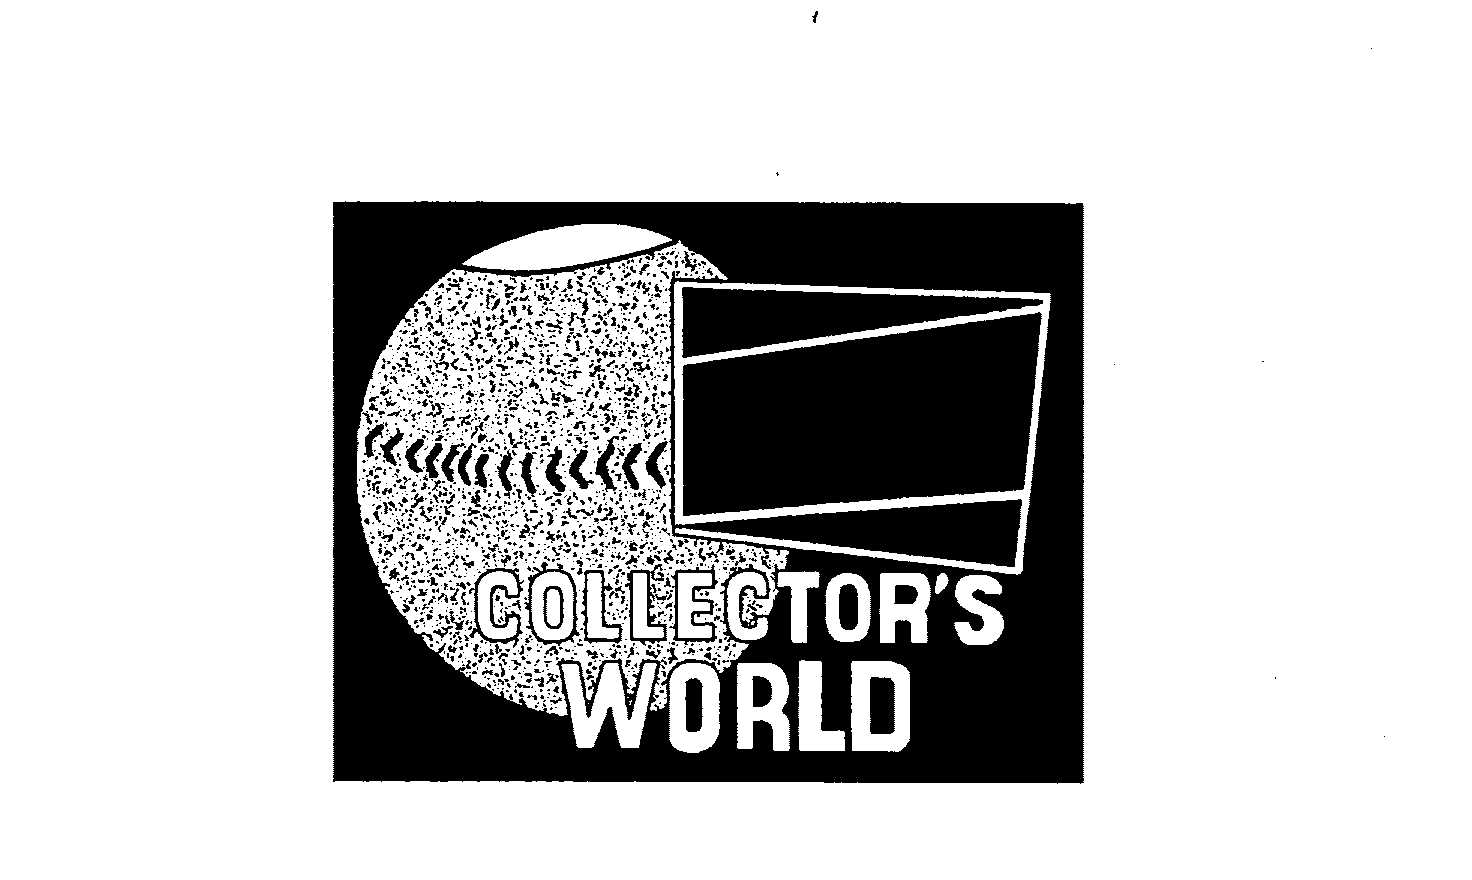  COLLECTOR'S WORLD